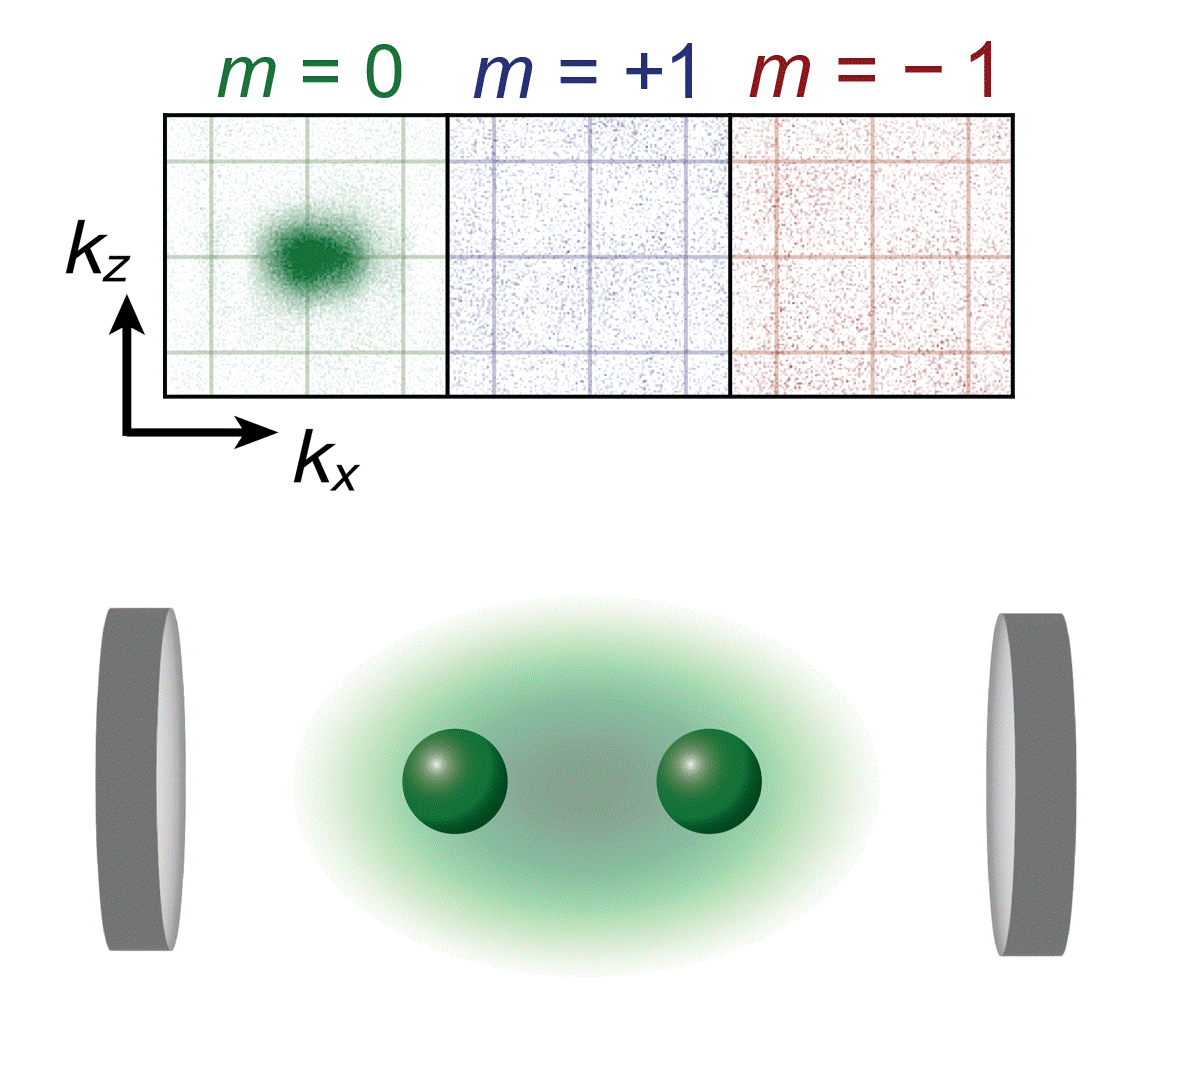 Spin- and momentum-correlated atom pairs mediated by photon exchange and seeded by vacuum fluctuations